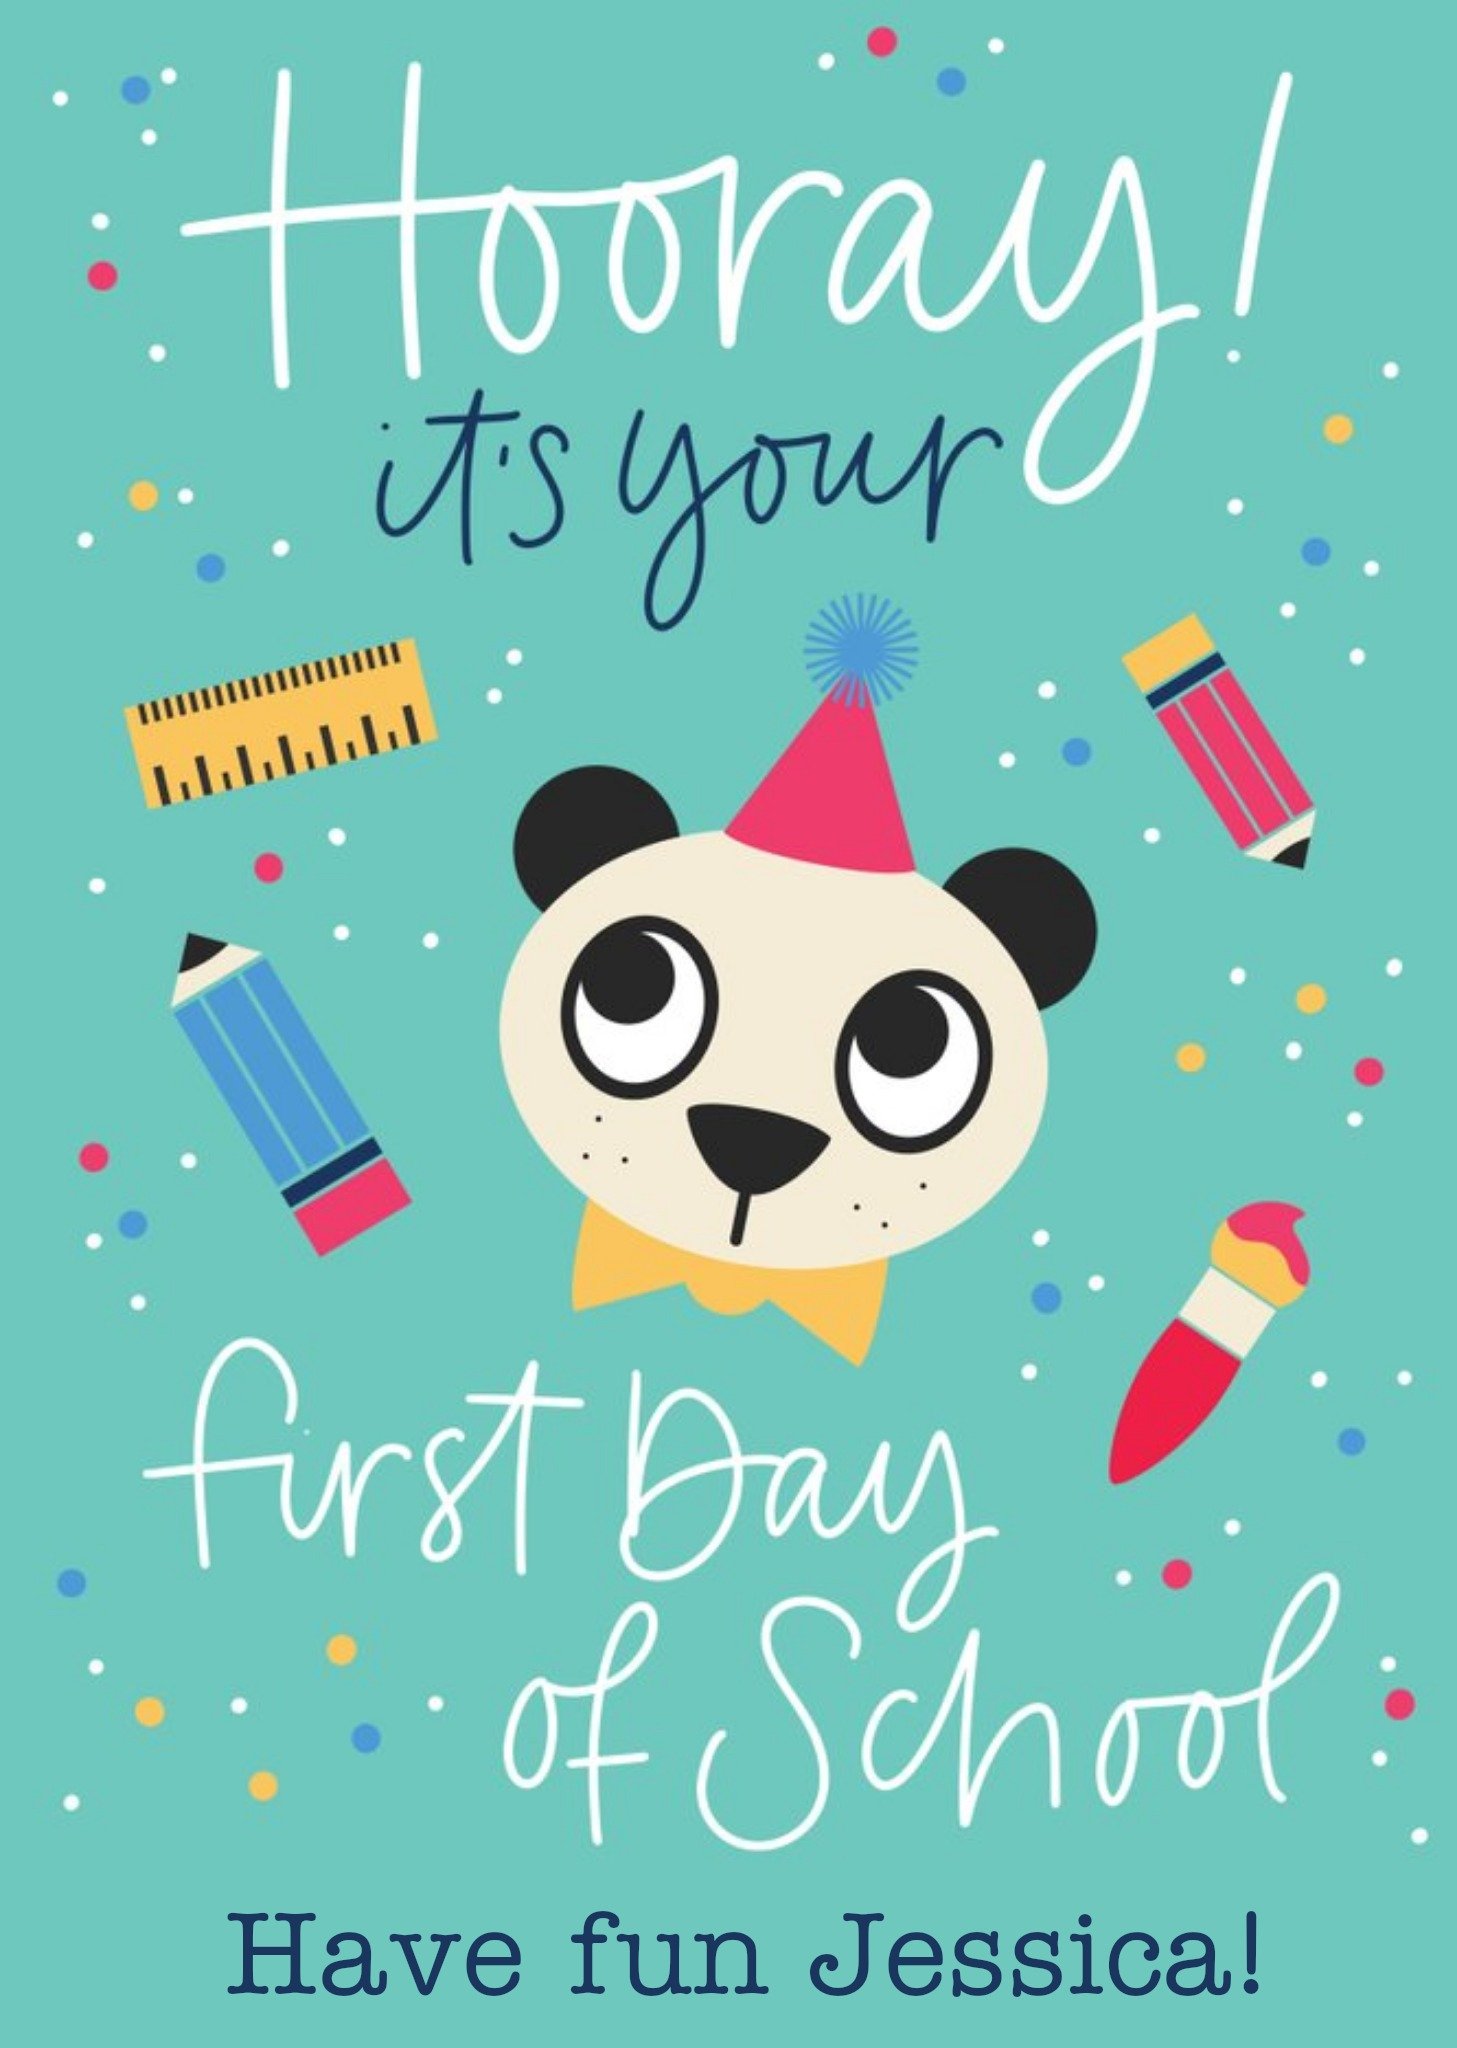 Moonpig Cute Illustration Of A Bear And Stationery Hooray Its Your First Day Of School Card, Large